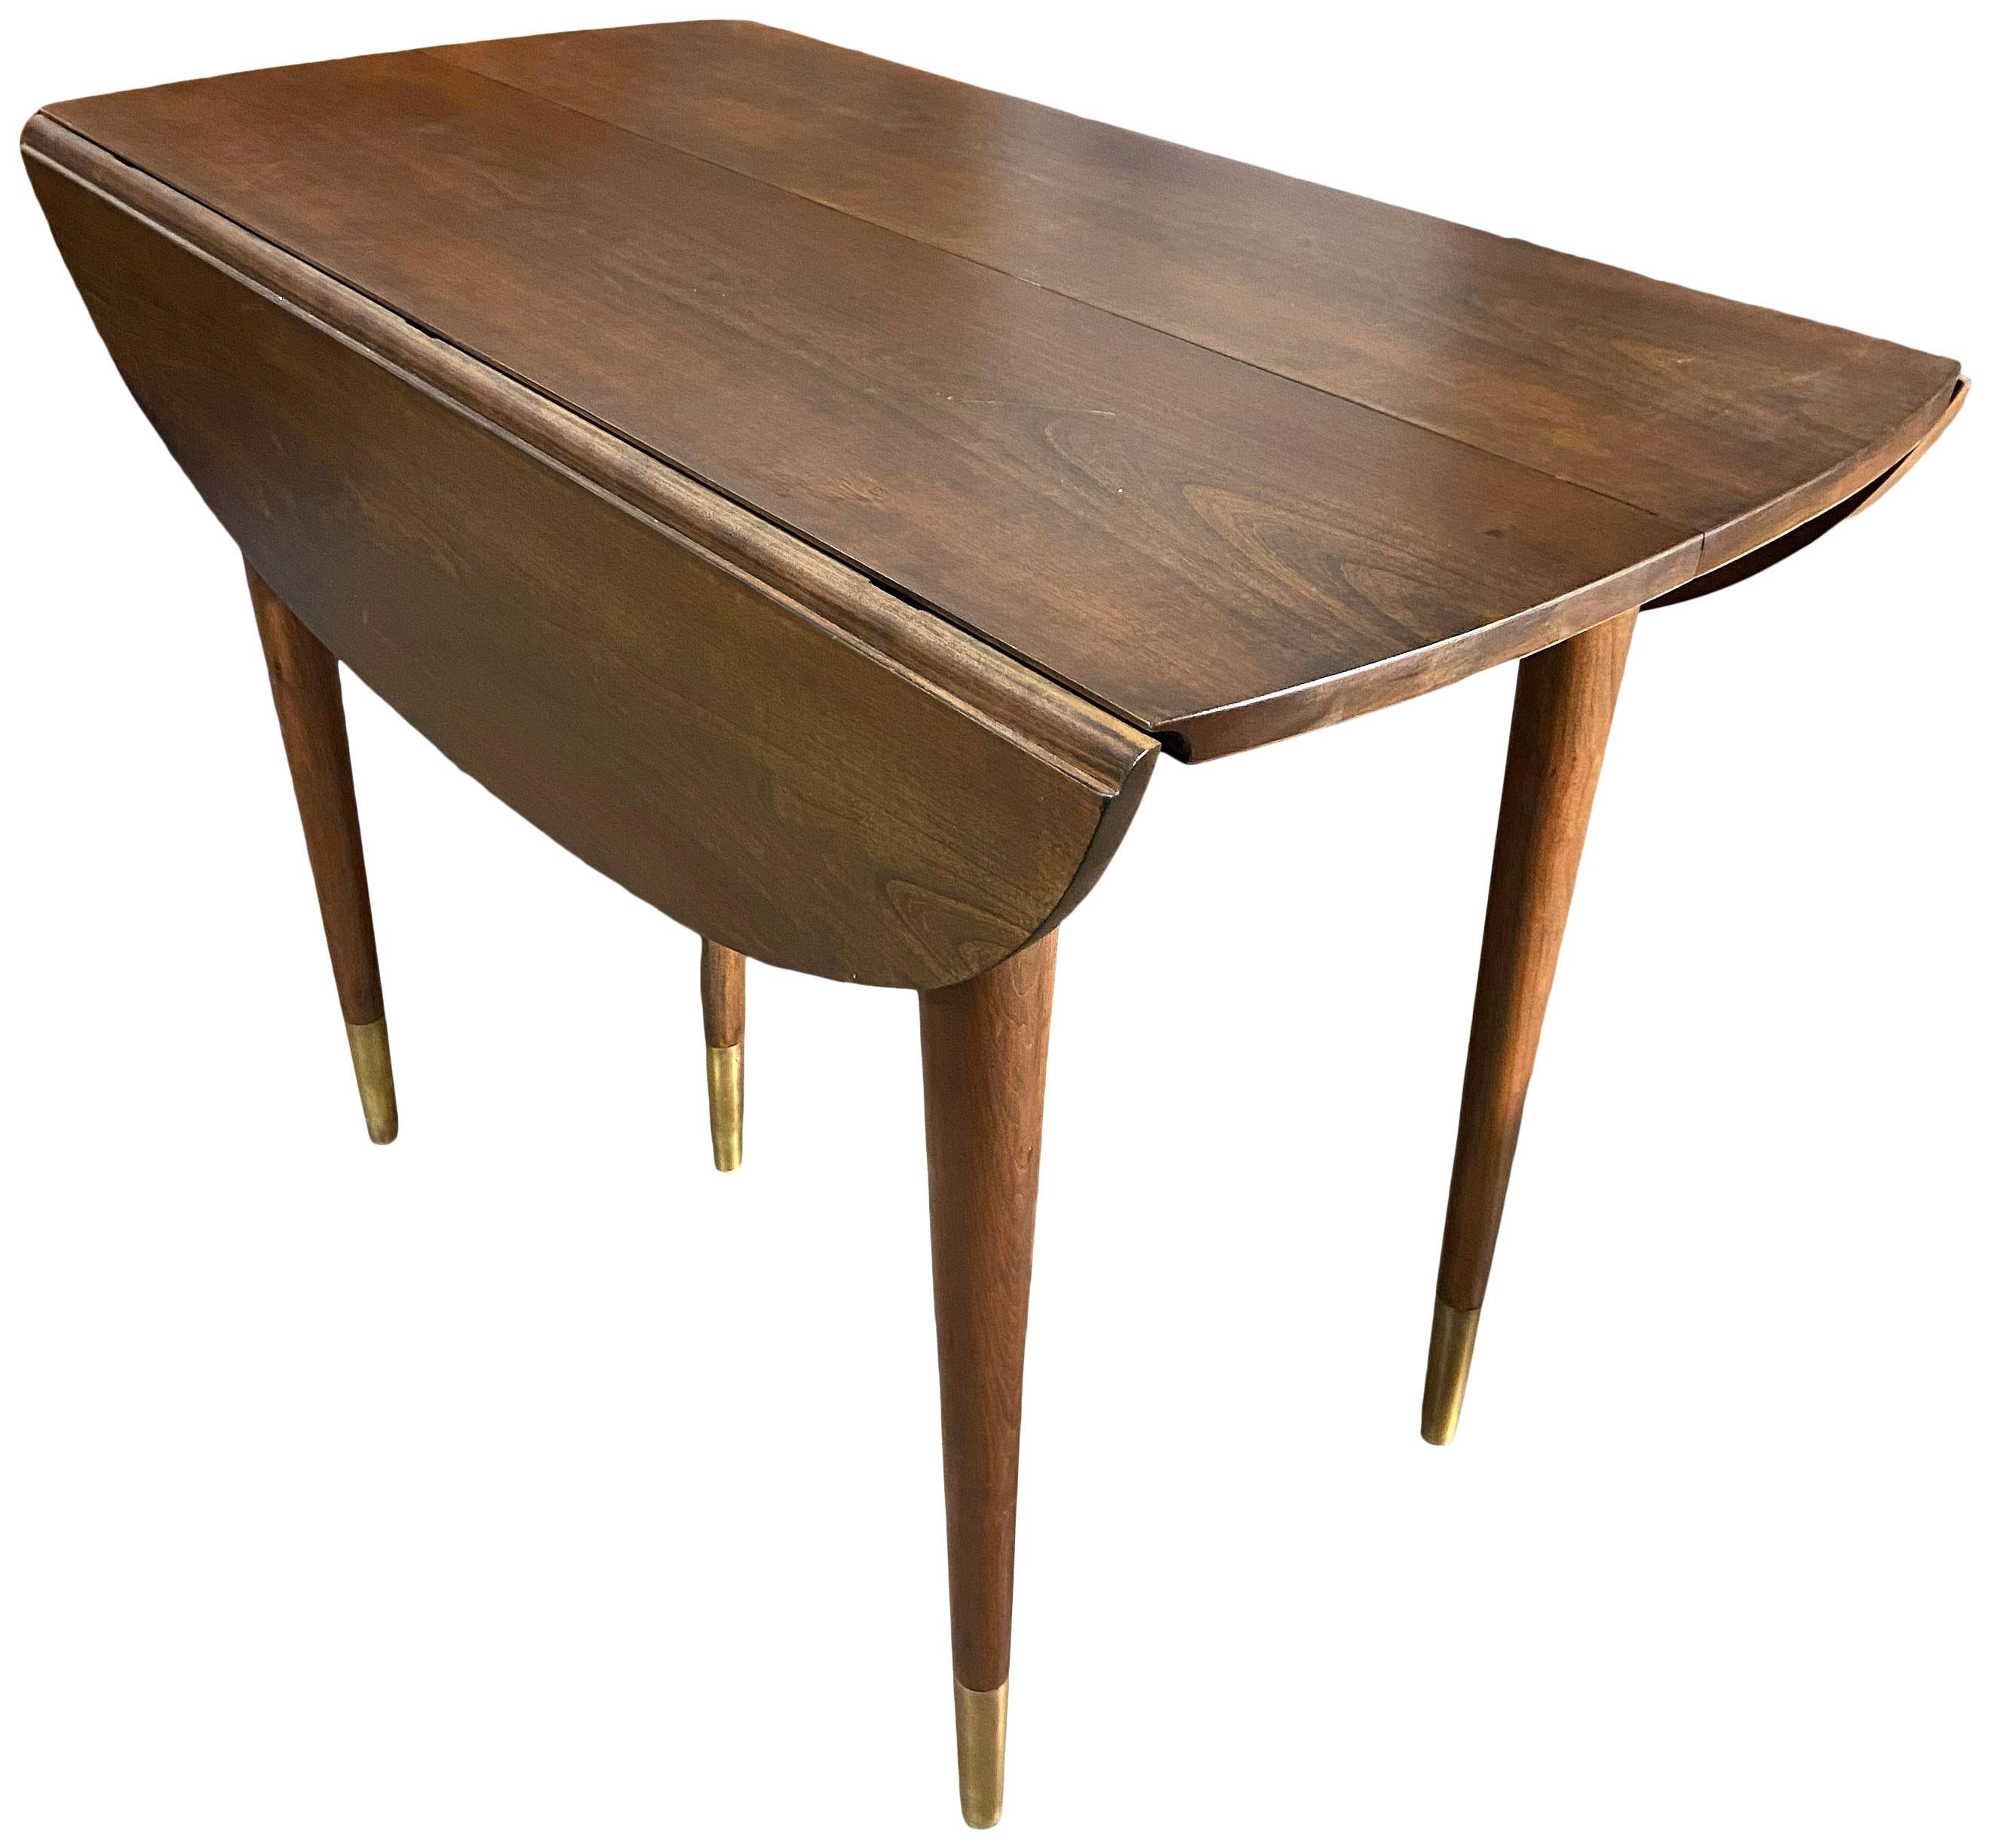 American Midcentury Extension Drop-Leaf Dining Table by John Widdicomb